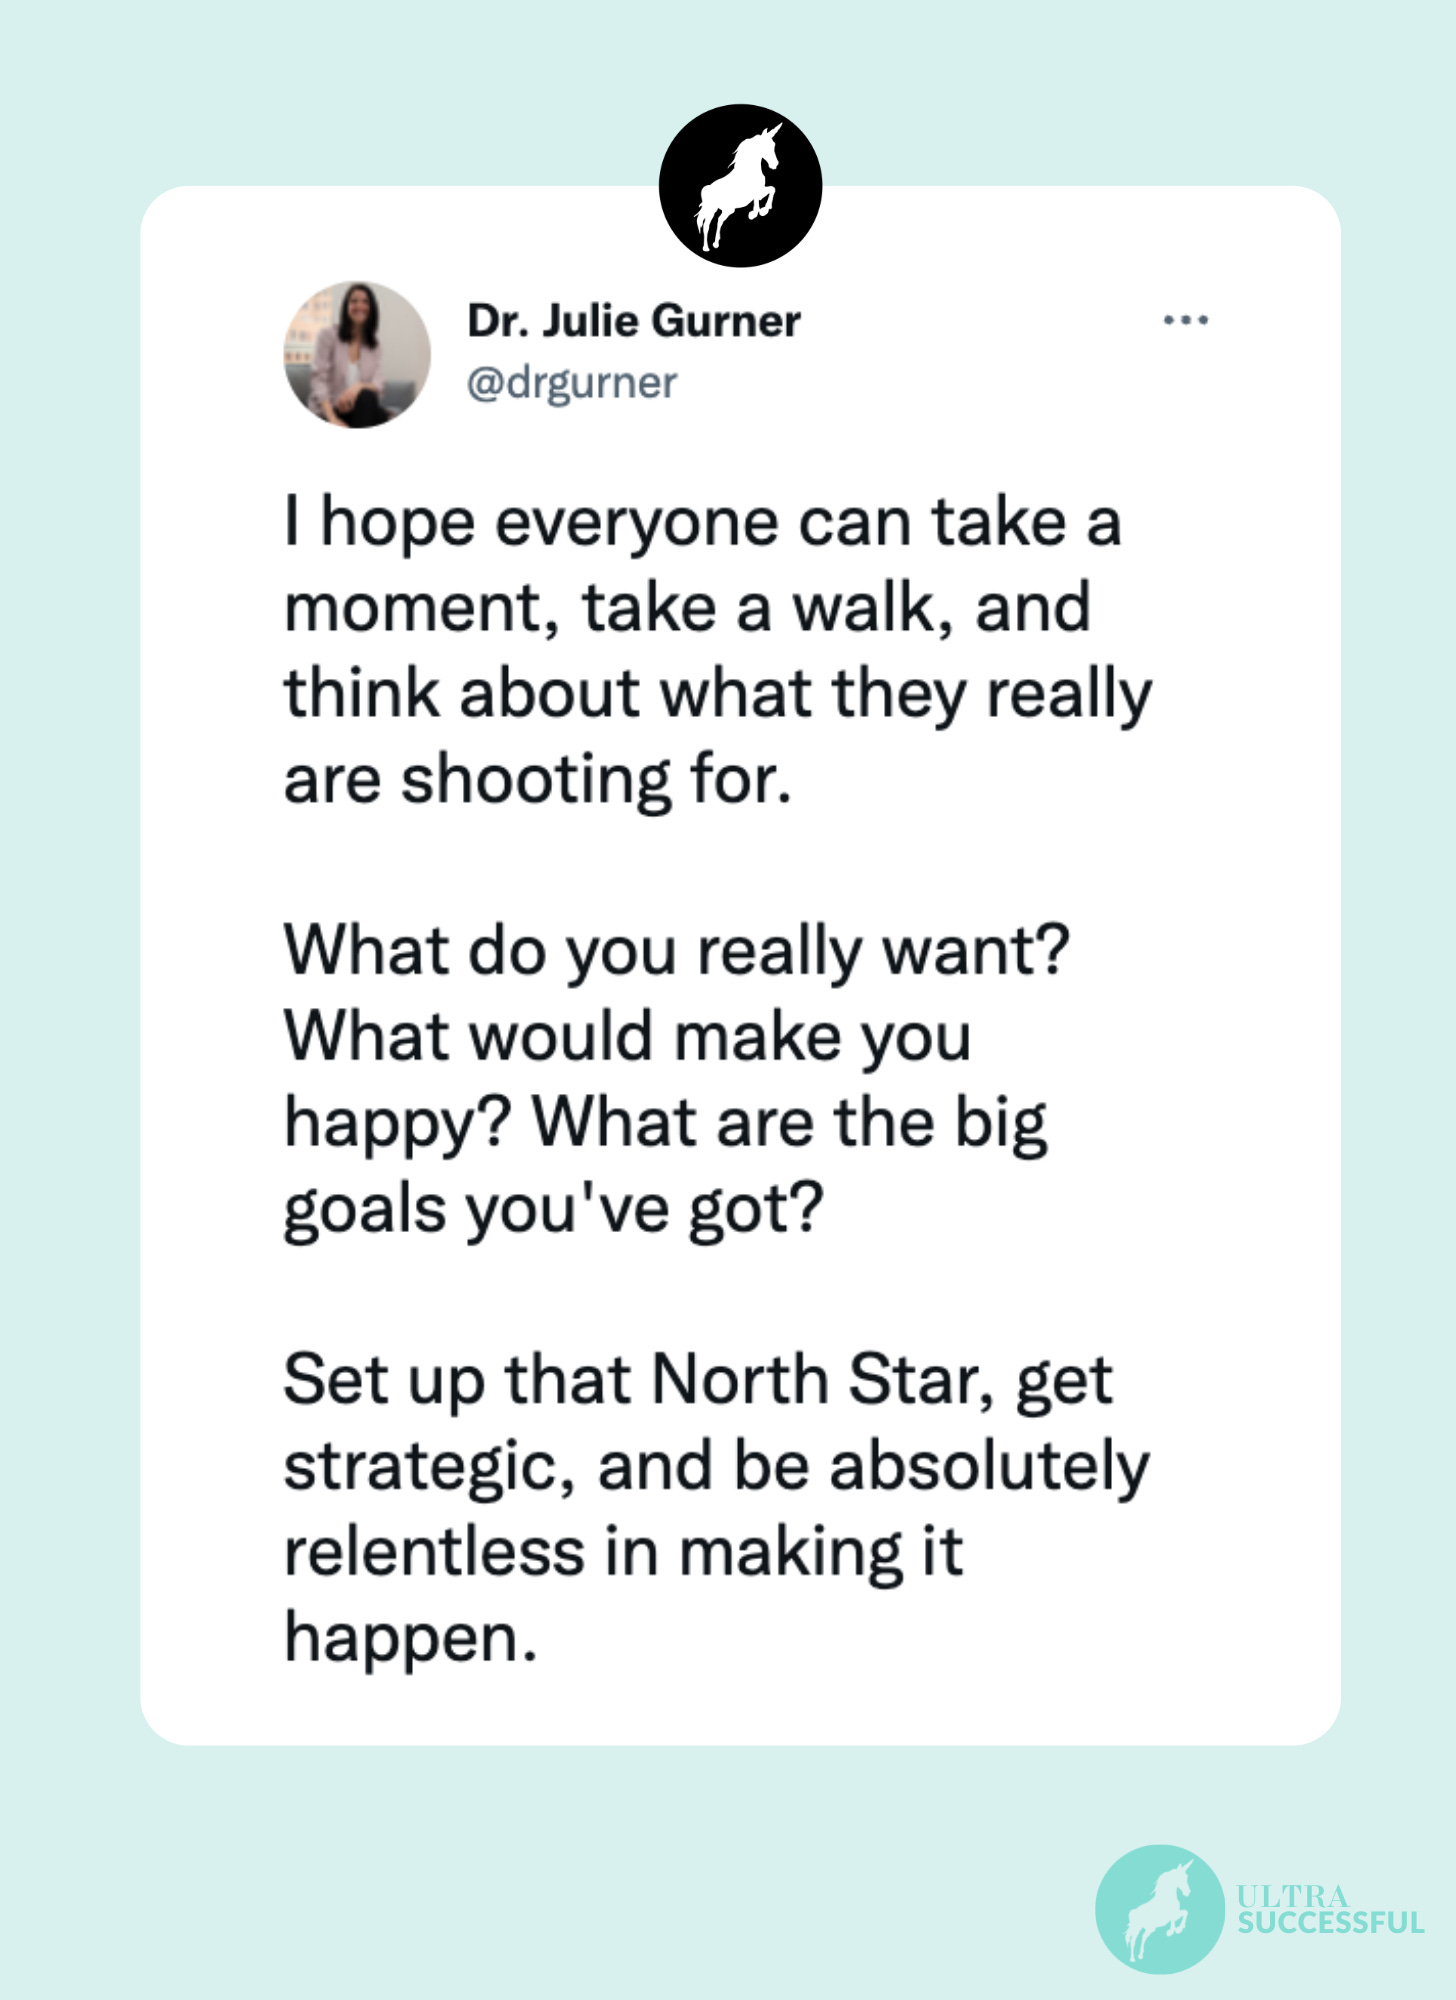 @drgurner: I hope everyone can take a moment, take a walk, and think about what they really are shooting for.  What do you really want? What would make you happy? What are the big goals you've got?  Set up that North Star, get strategic, and be absolutely relentless in making it happen.